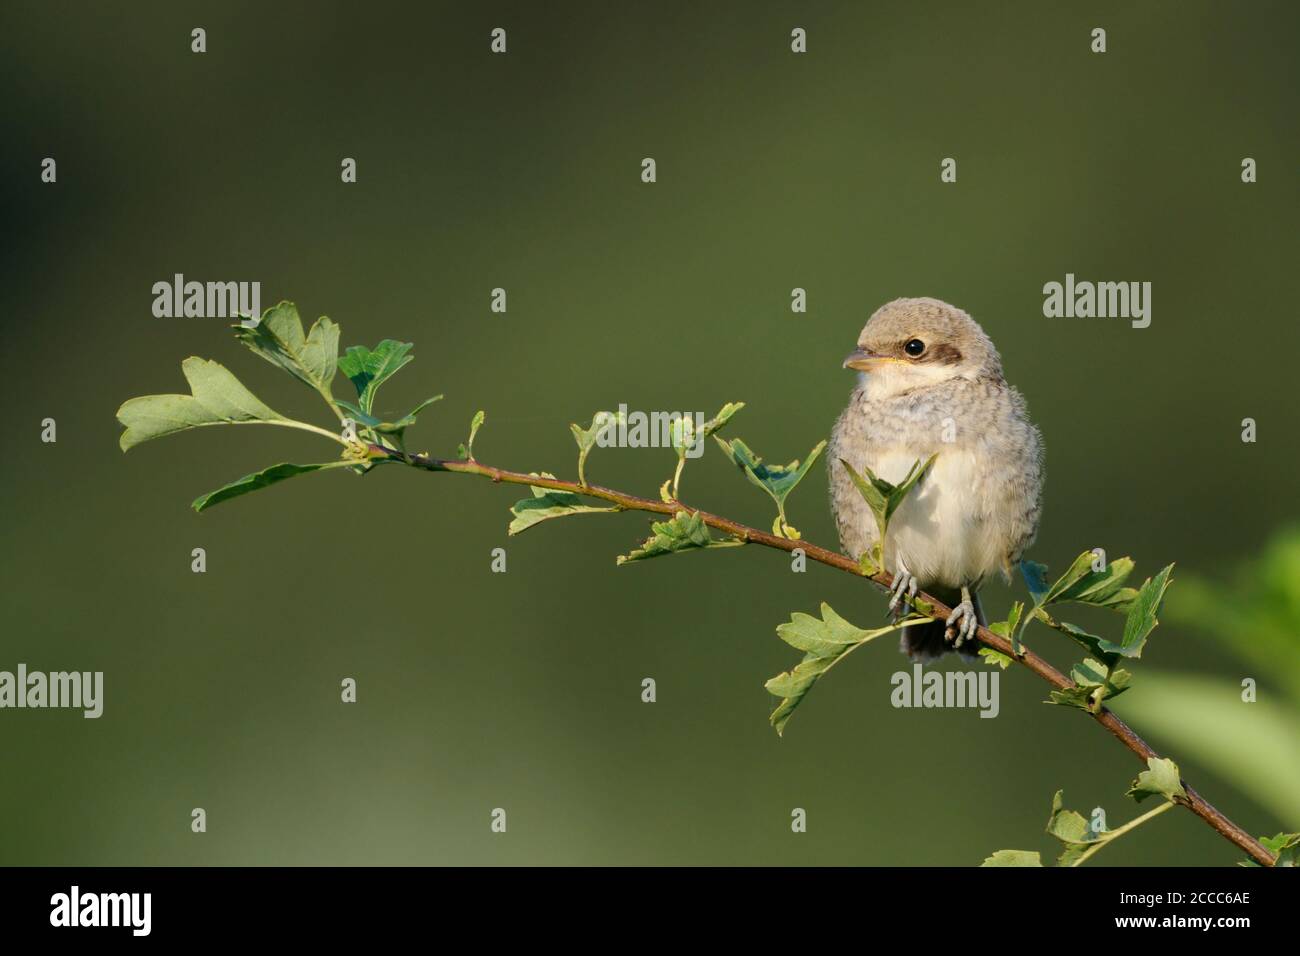 Red-backed shrike / Neuntoeter (Lanius collurio), young adolescent, perched on top of a bush, typical hedgerow bird, endangered species, wildlife Euro Stock Photo